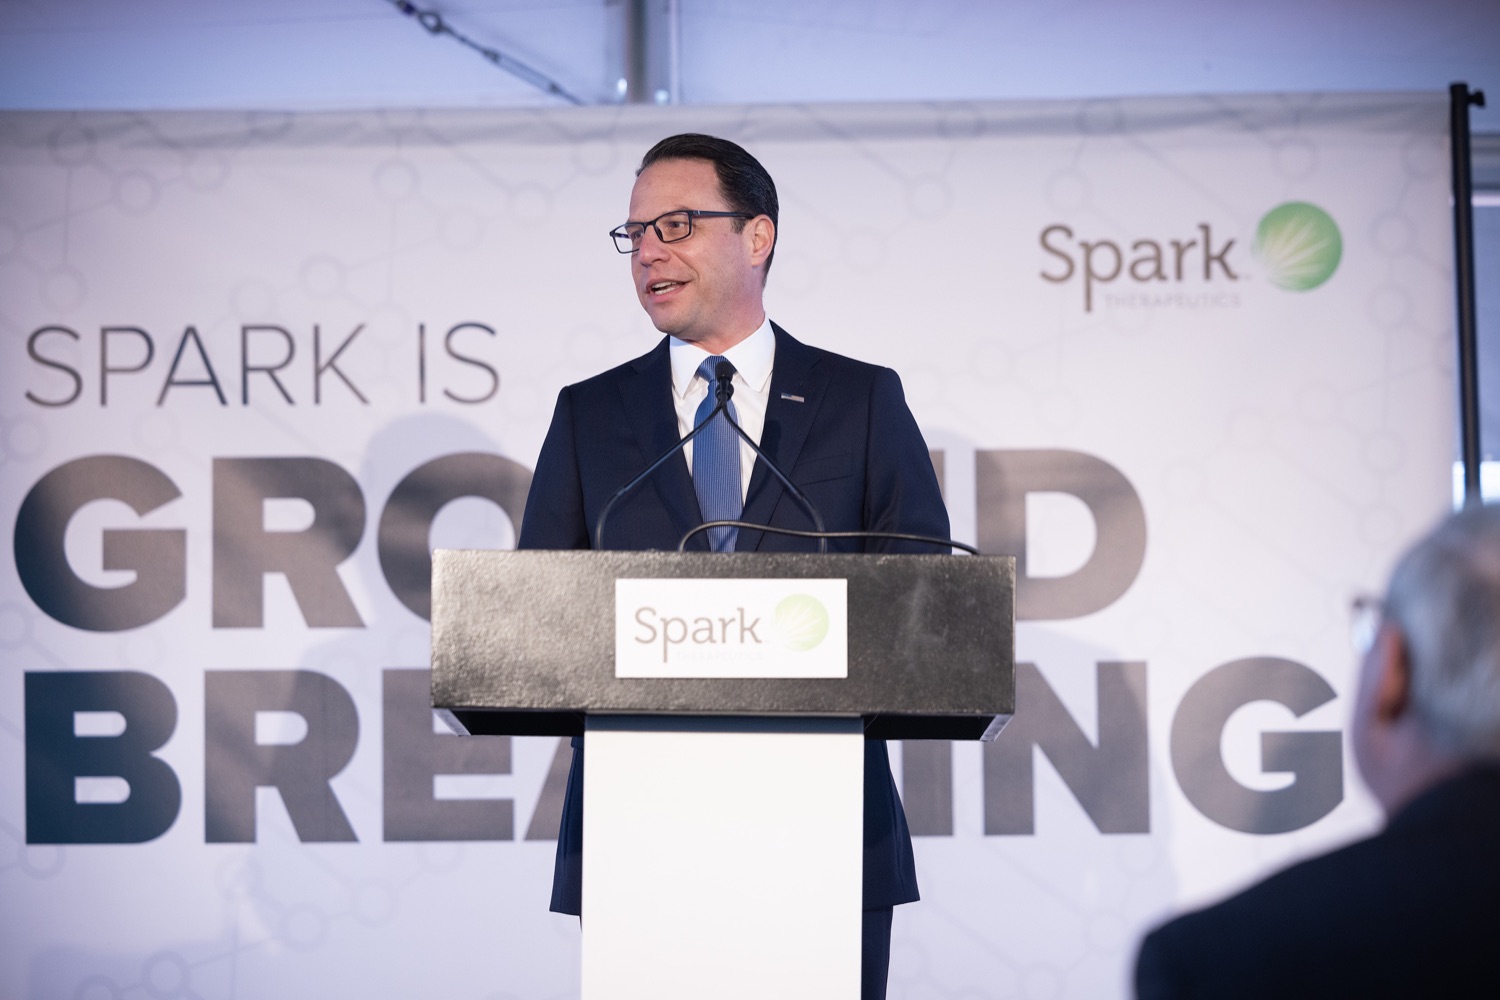 Pennsylvania Governor Josh Shapiro speaks with the press.   Pennsylvania Governor Josh Shapiro participates in a groundbreaking for Spark Therapeutics at the future site of their new building, at 30th and Chestnut streets.  FEBRUARY 28, 2023 - PHILADELPHIA, PA<br><a href="https://filesource.amperwave.net/commonwealthofpa/photo/22728_gov_spark_dz_0007.JPG" target="_blank">⇣ Download Photo</a>